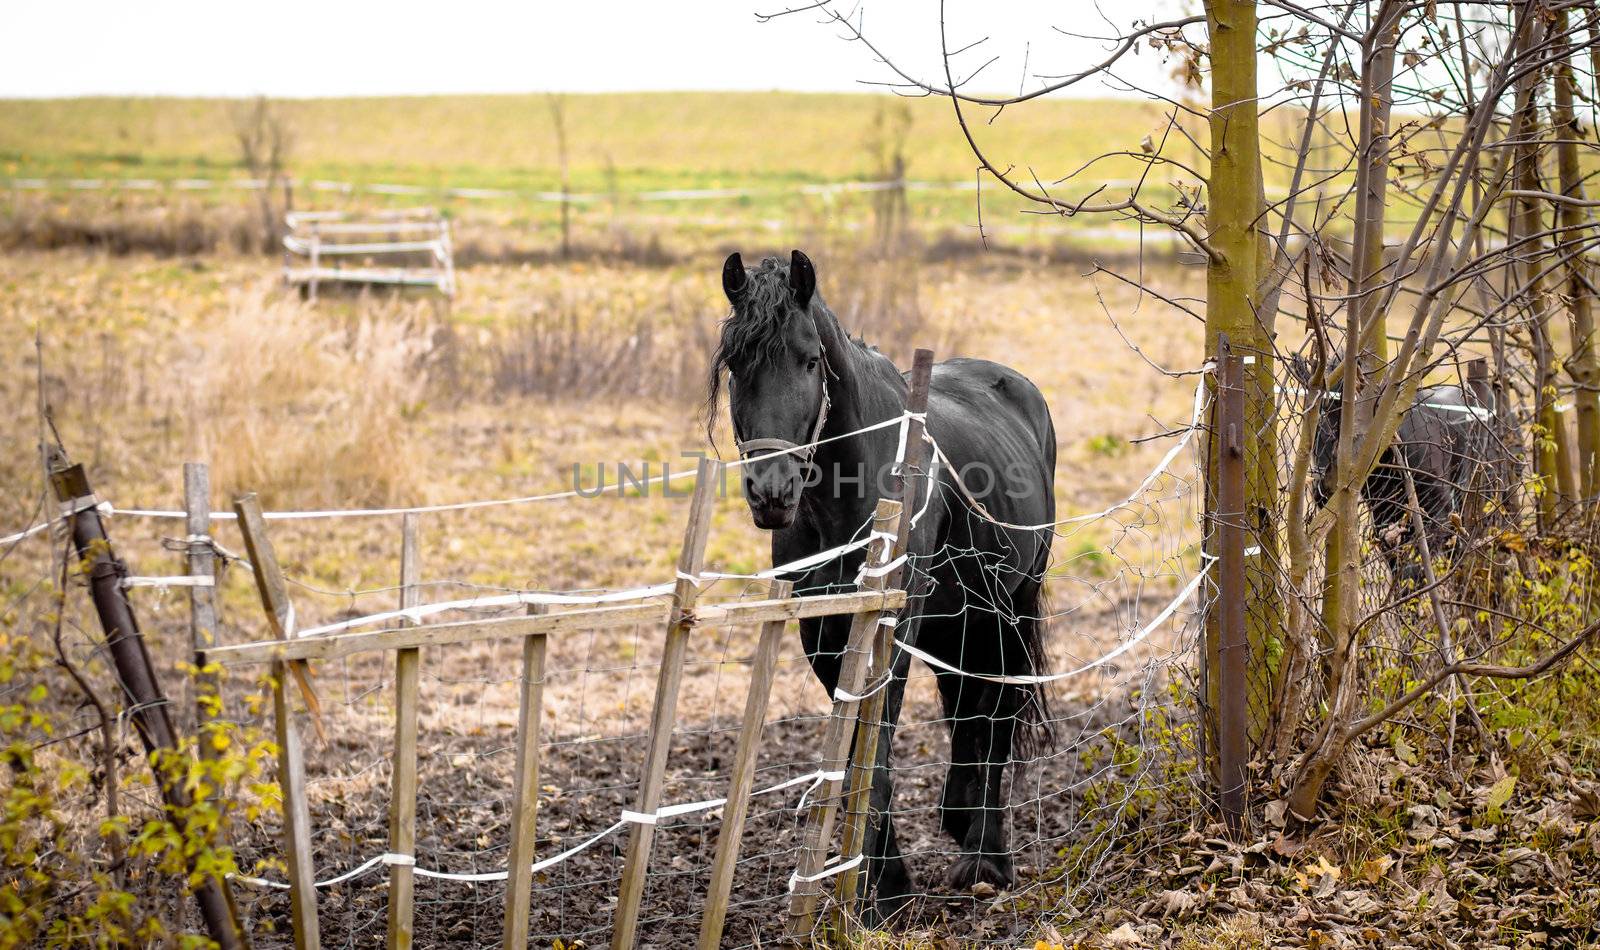 Skinny Horse outside in fenced yard area by artush